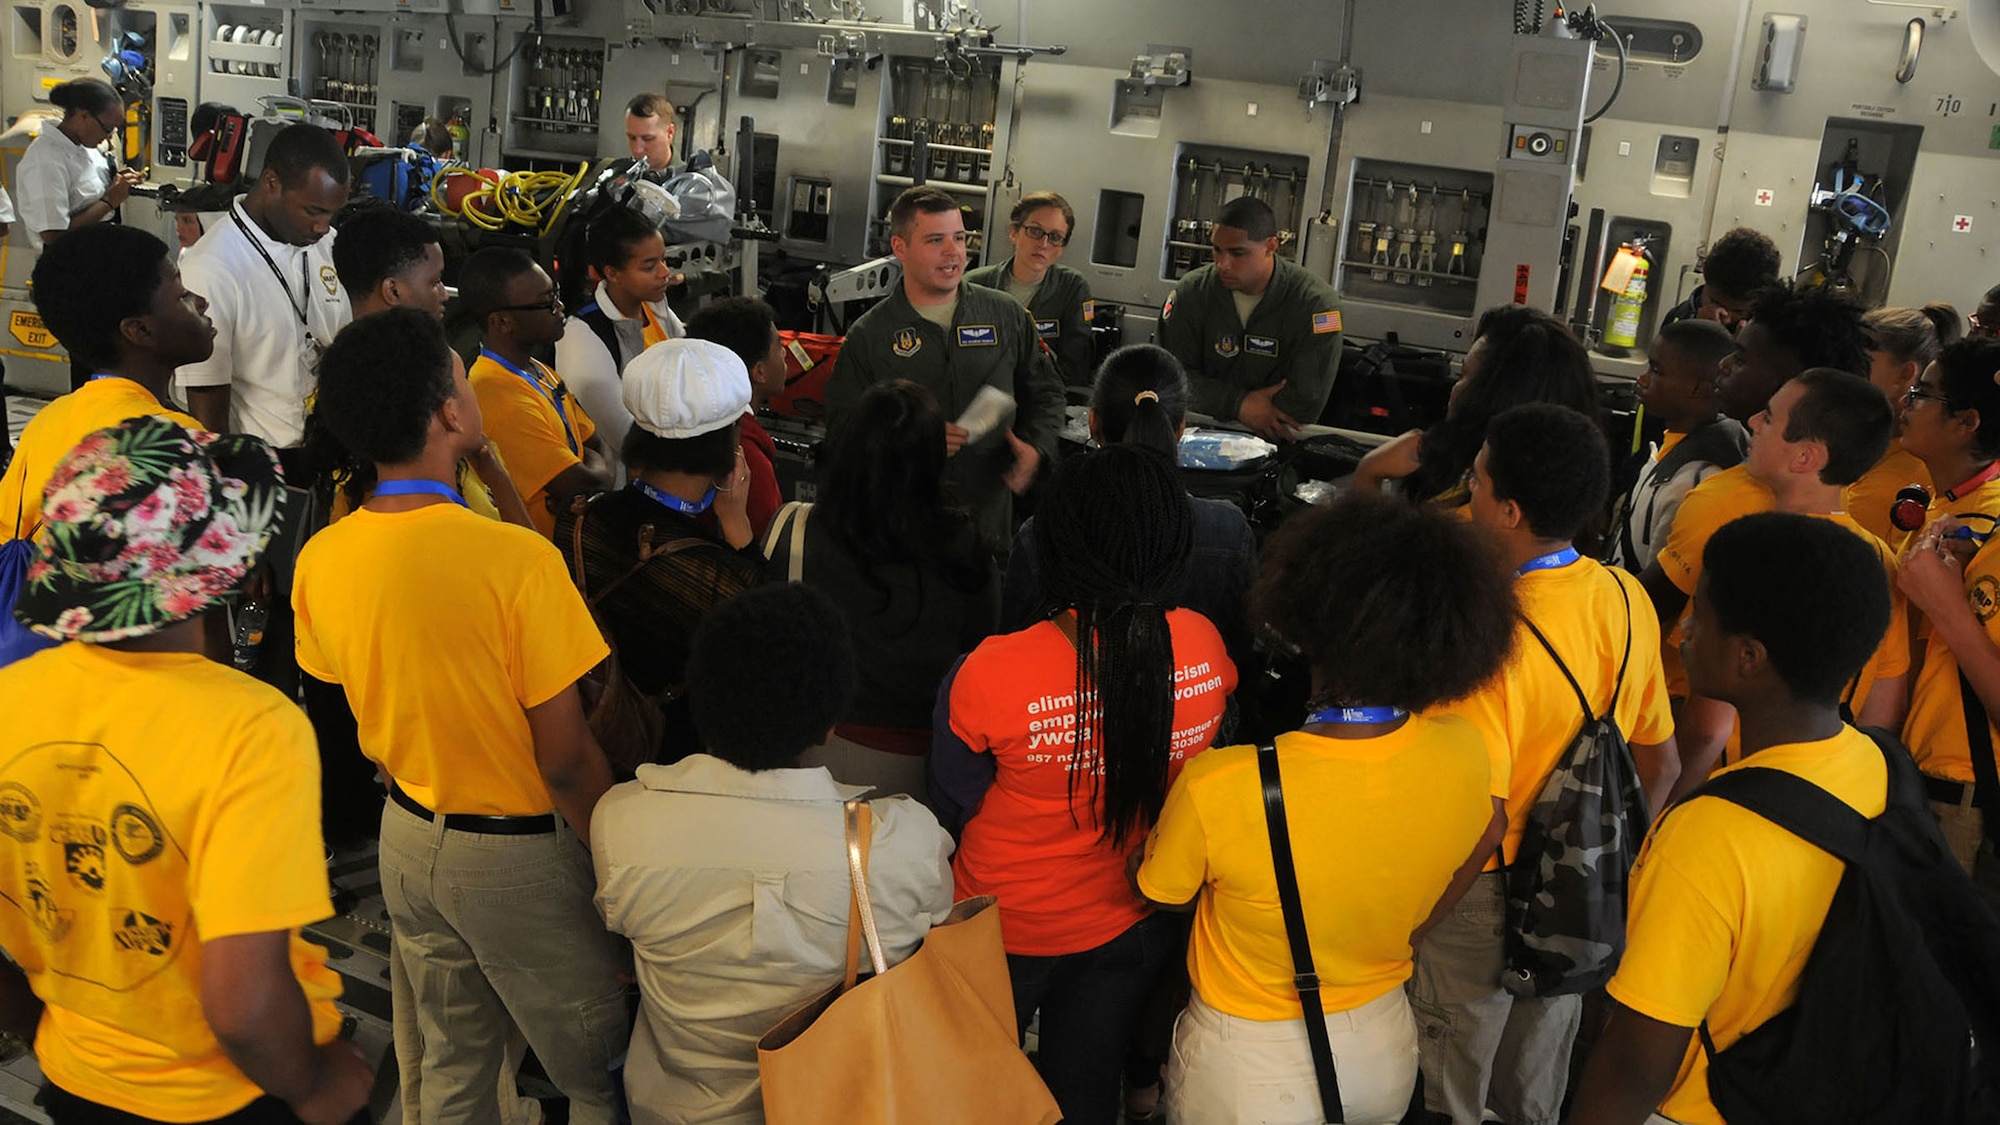 445th Aeromedical Evacuation Squadron AE technician Senior Airman Brandon Croghan talks with Dream Flight participants about the role of AES in the Air Force Reserve during their visit to the 445th Airlift Wing July 22, 2015. More than 180 students ages 14-18 and their chaperons visited the wing as part of the 16th Annual Delta Airlines sponsored Dream Flight program. (U.S. Air Force photo/Tech. Sgt. Anthony Springer)